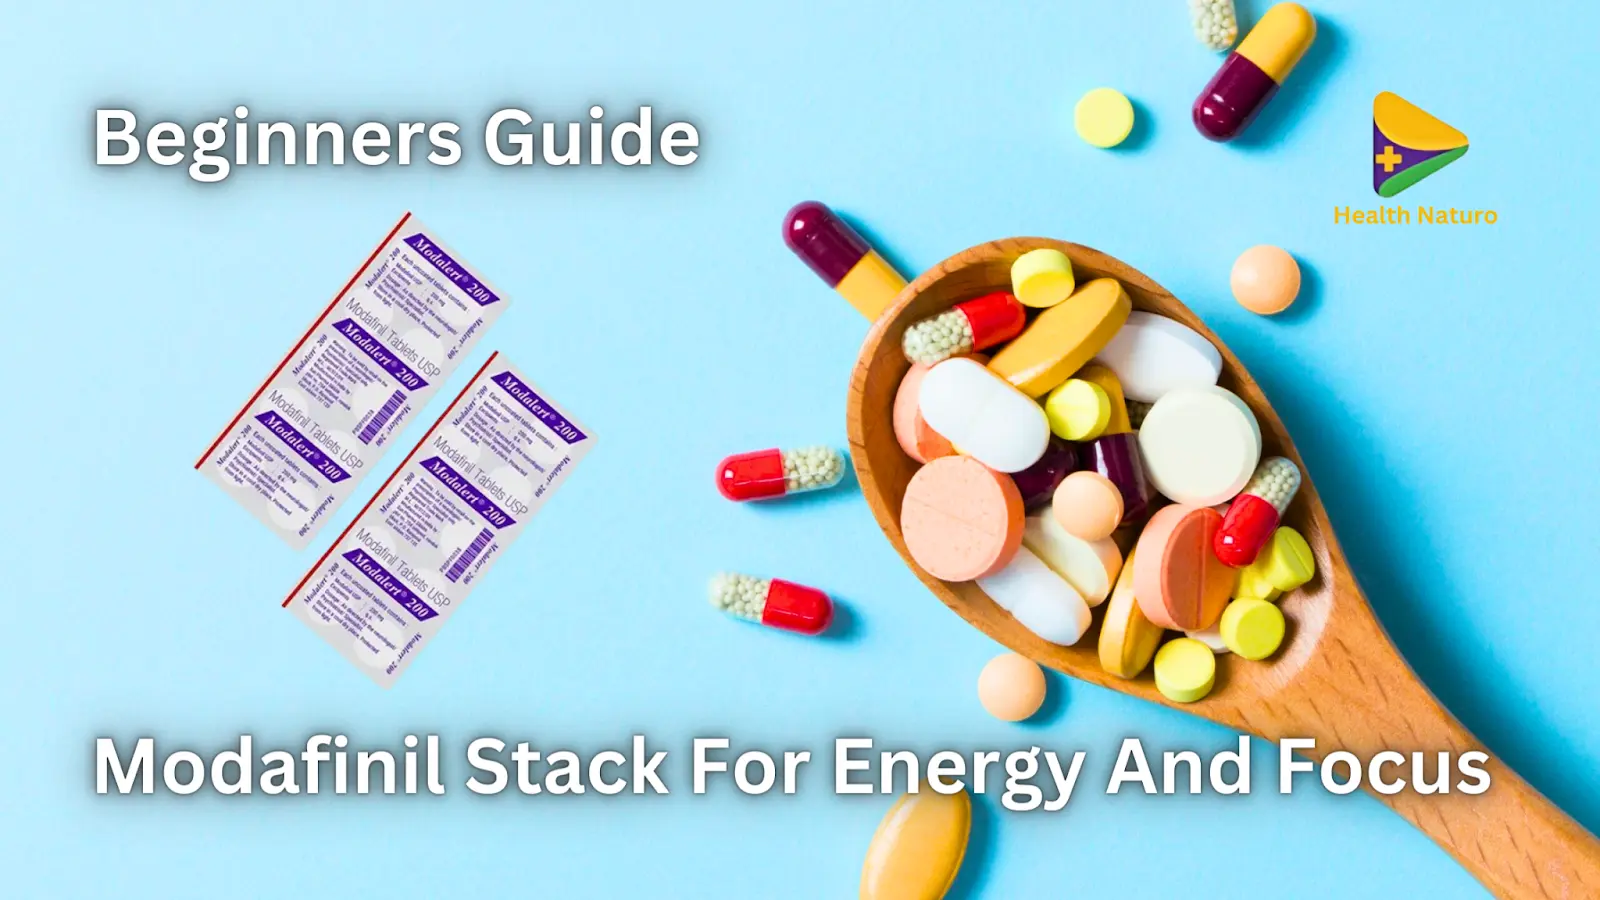 Beginners Guide: Modafinil Stack For Energy And Focus